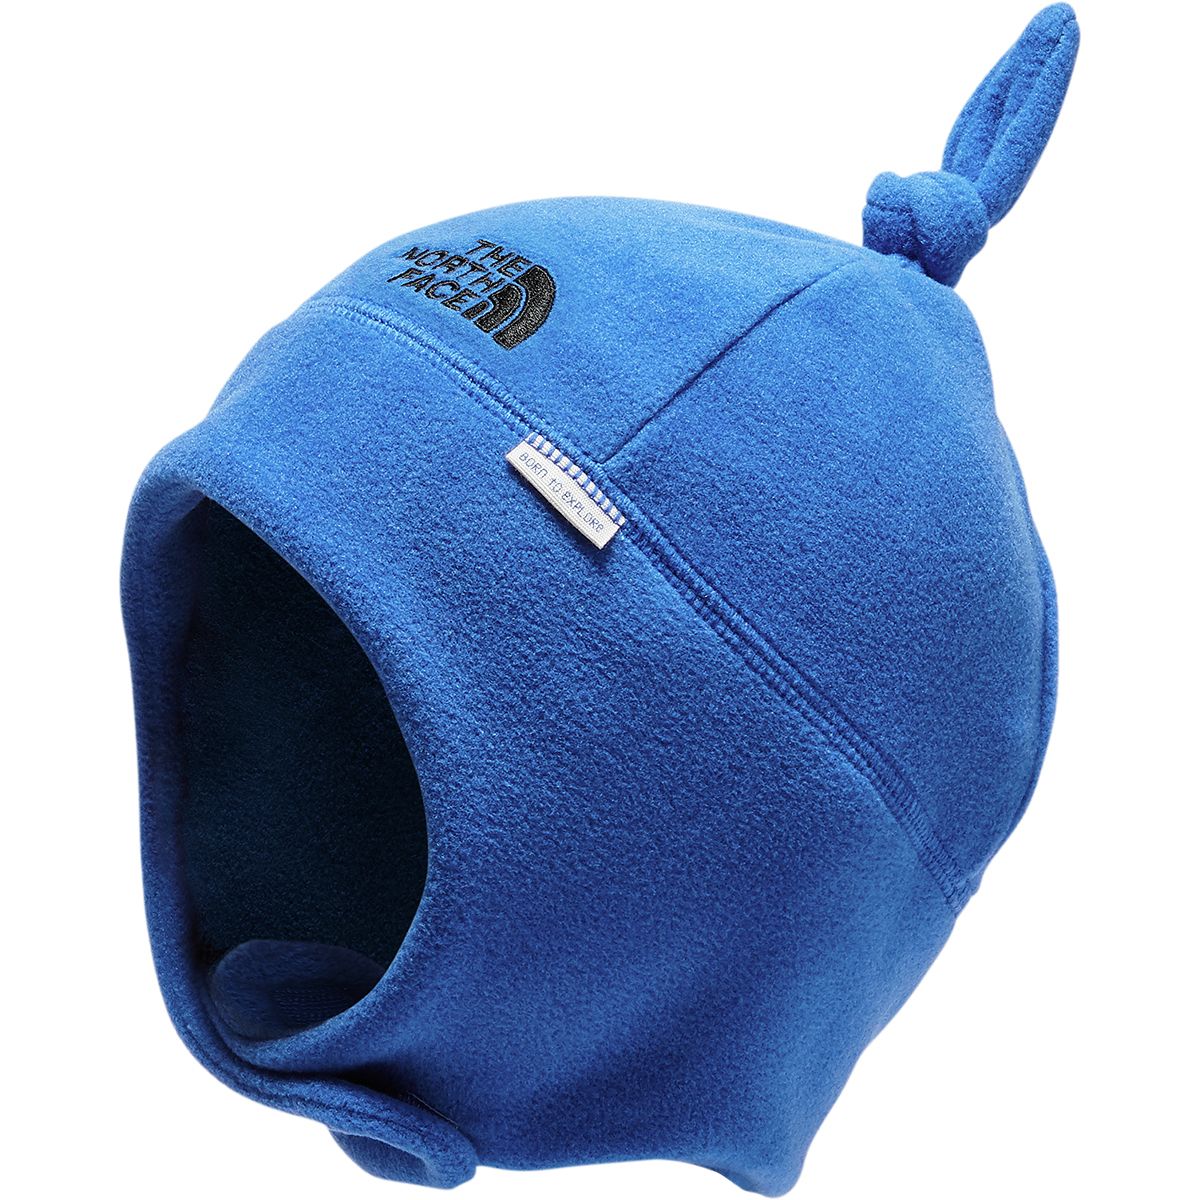 north face infant beanie